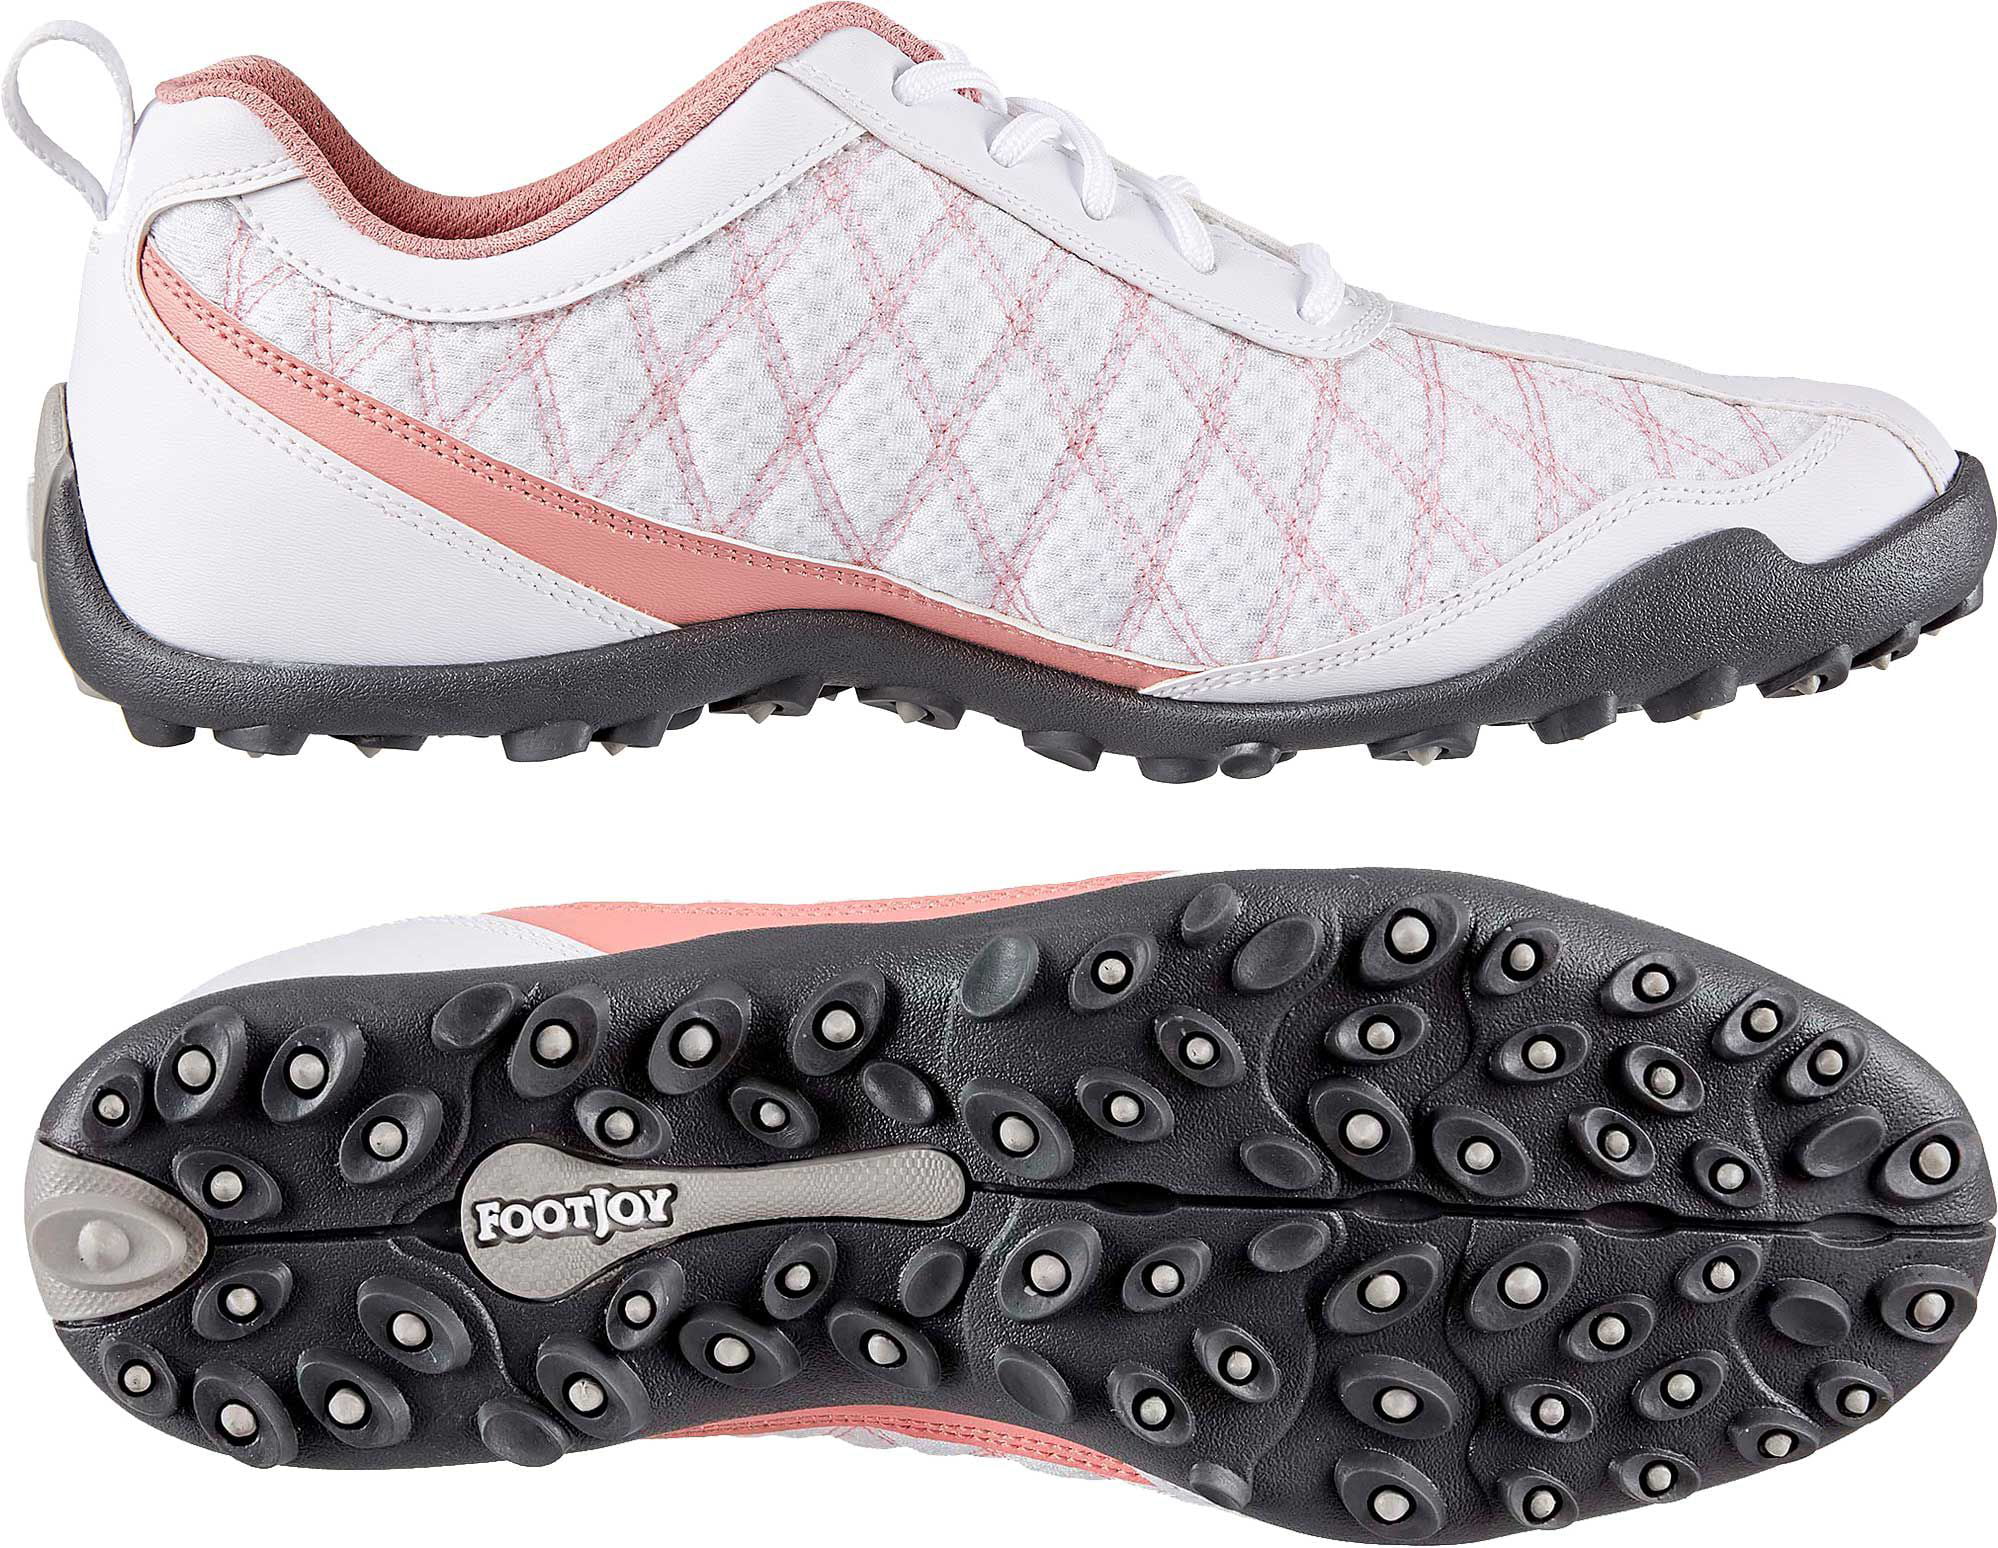 Foot Joy Womens Golf Shoes - Styles Suggest